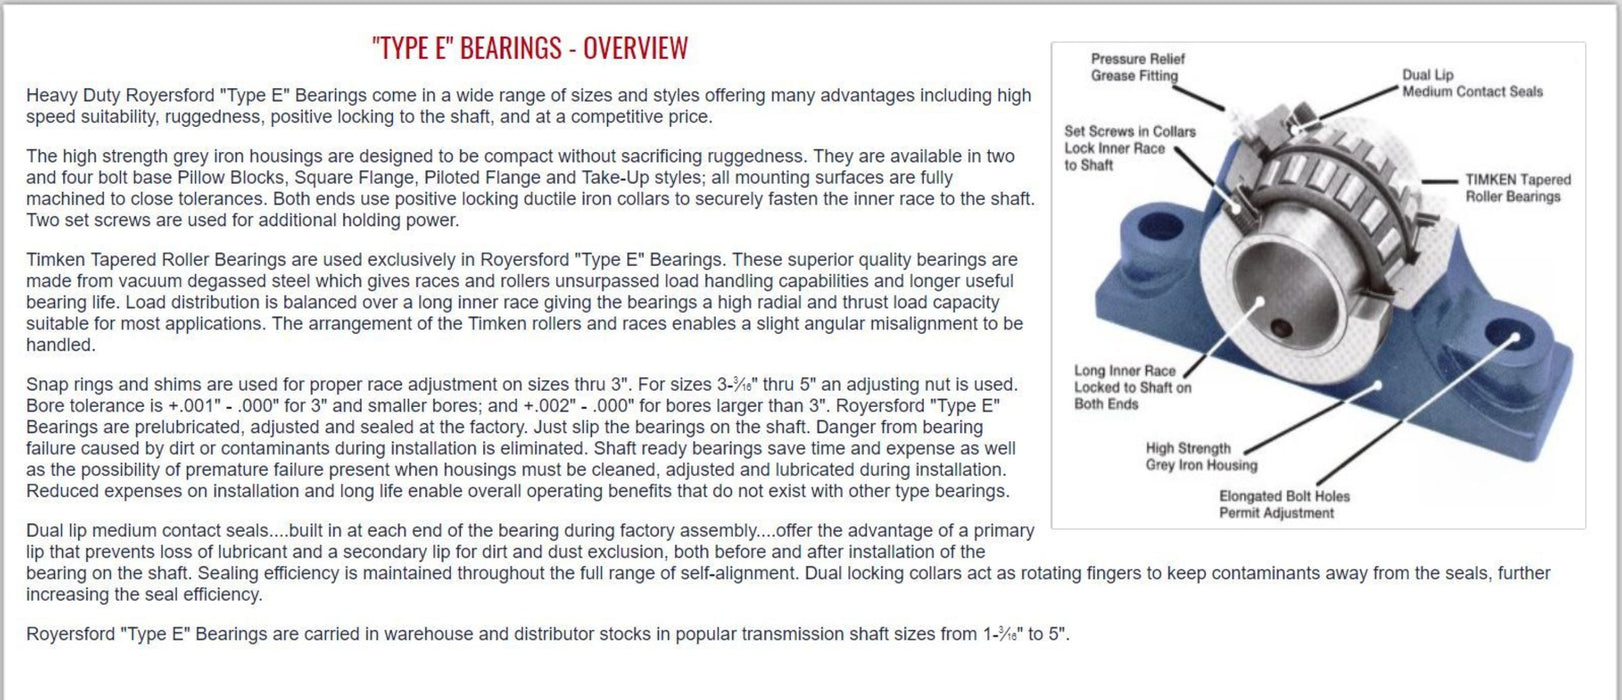 20-04-0307, Royersford Type E 4-Bolt Pillow Block Bearing, 3-7/16 with Timken Tapered Roller Bearings